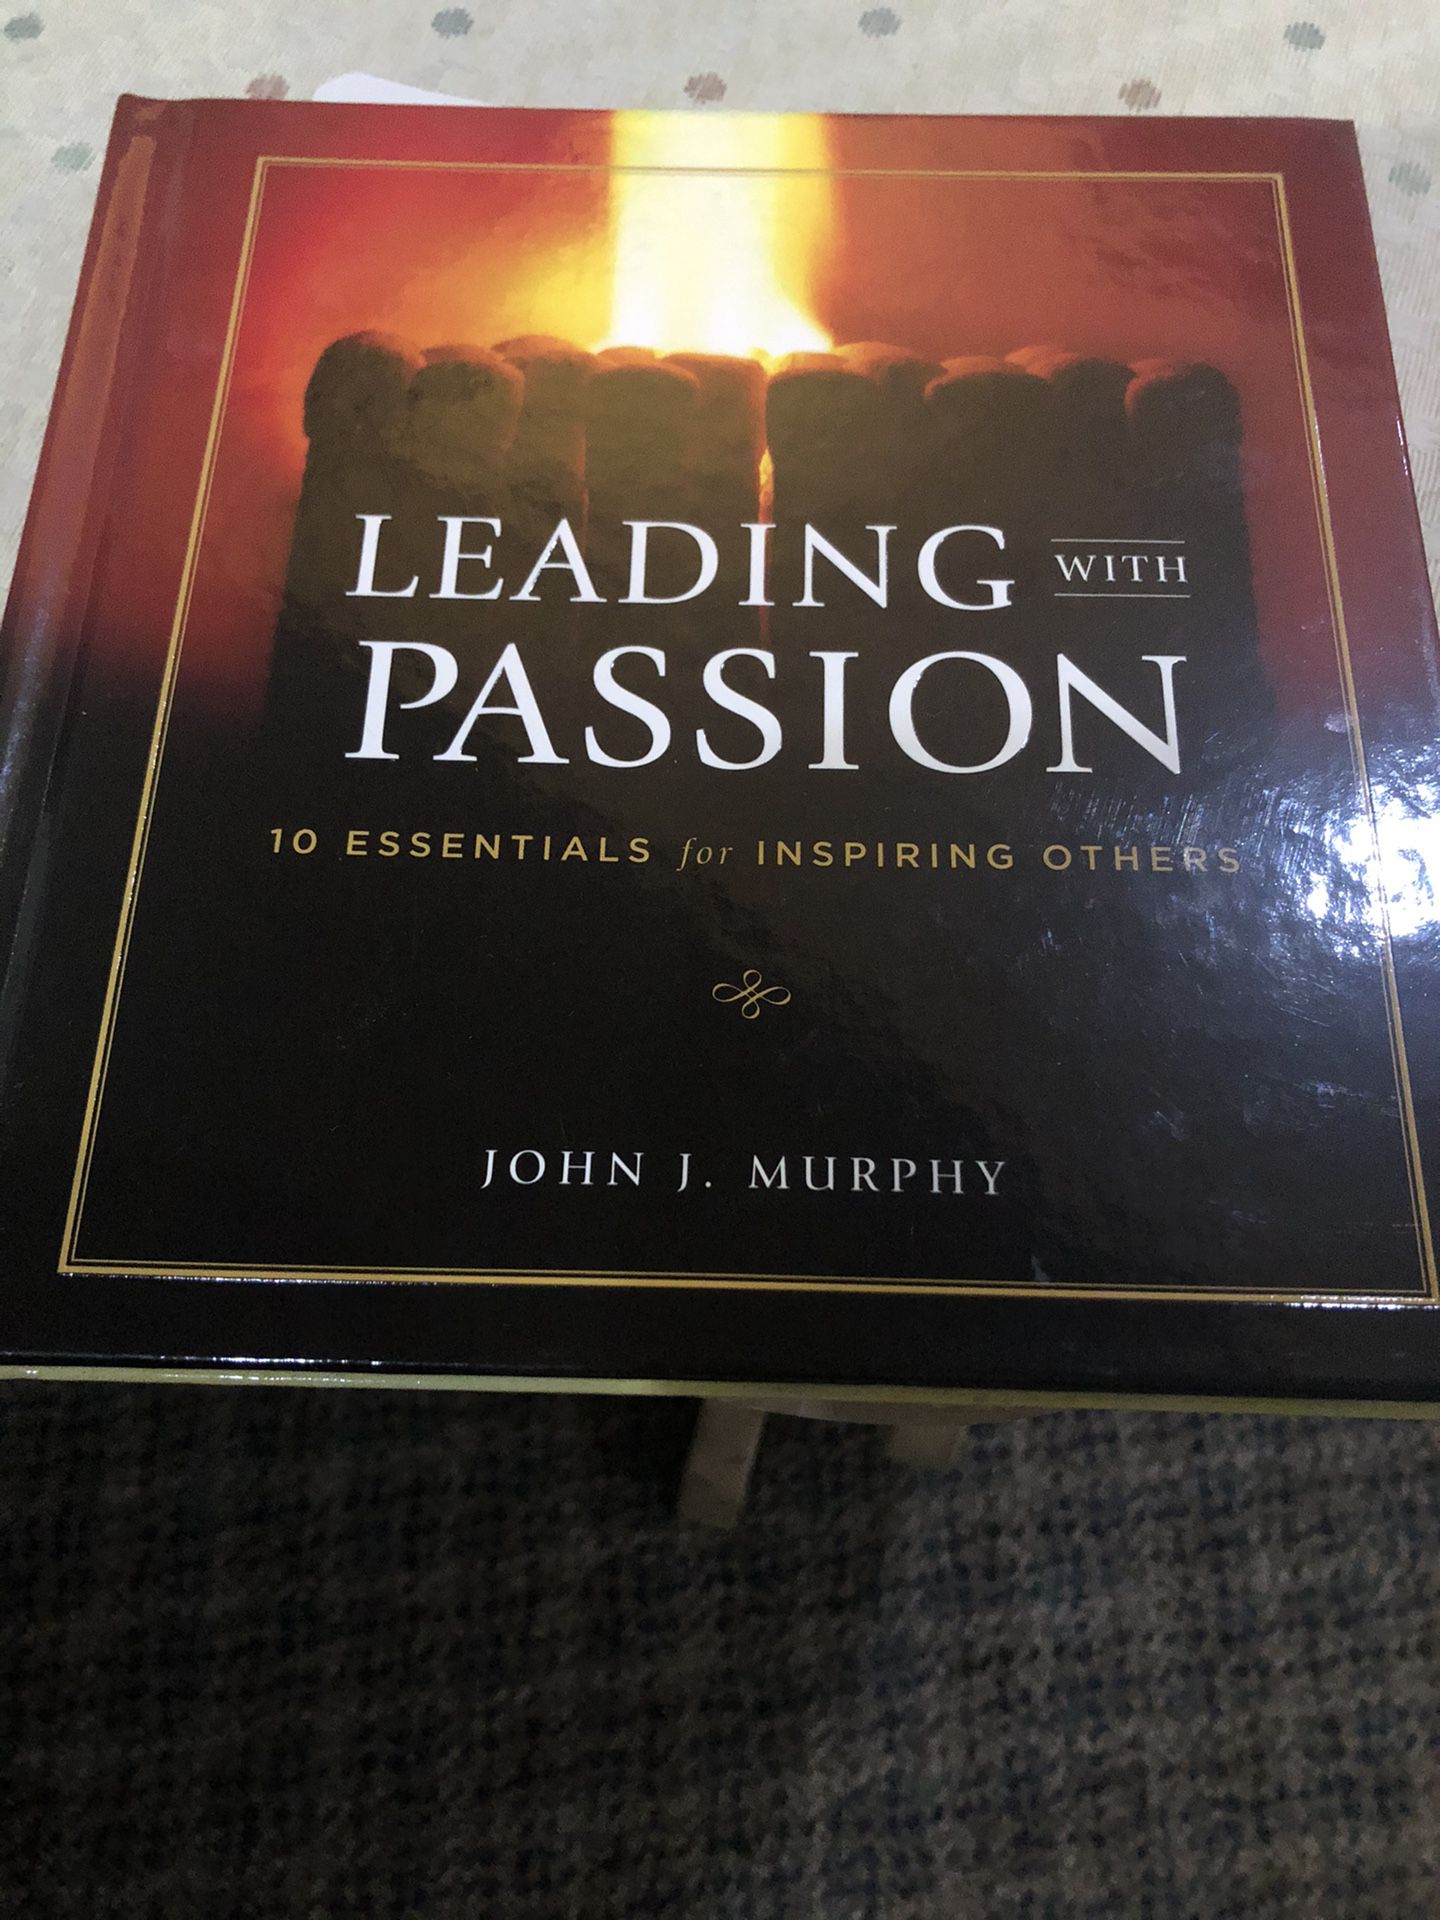 Leading with passion